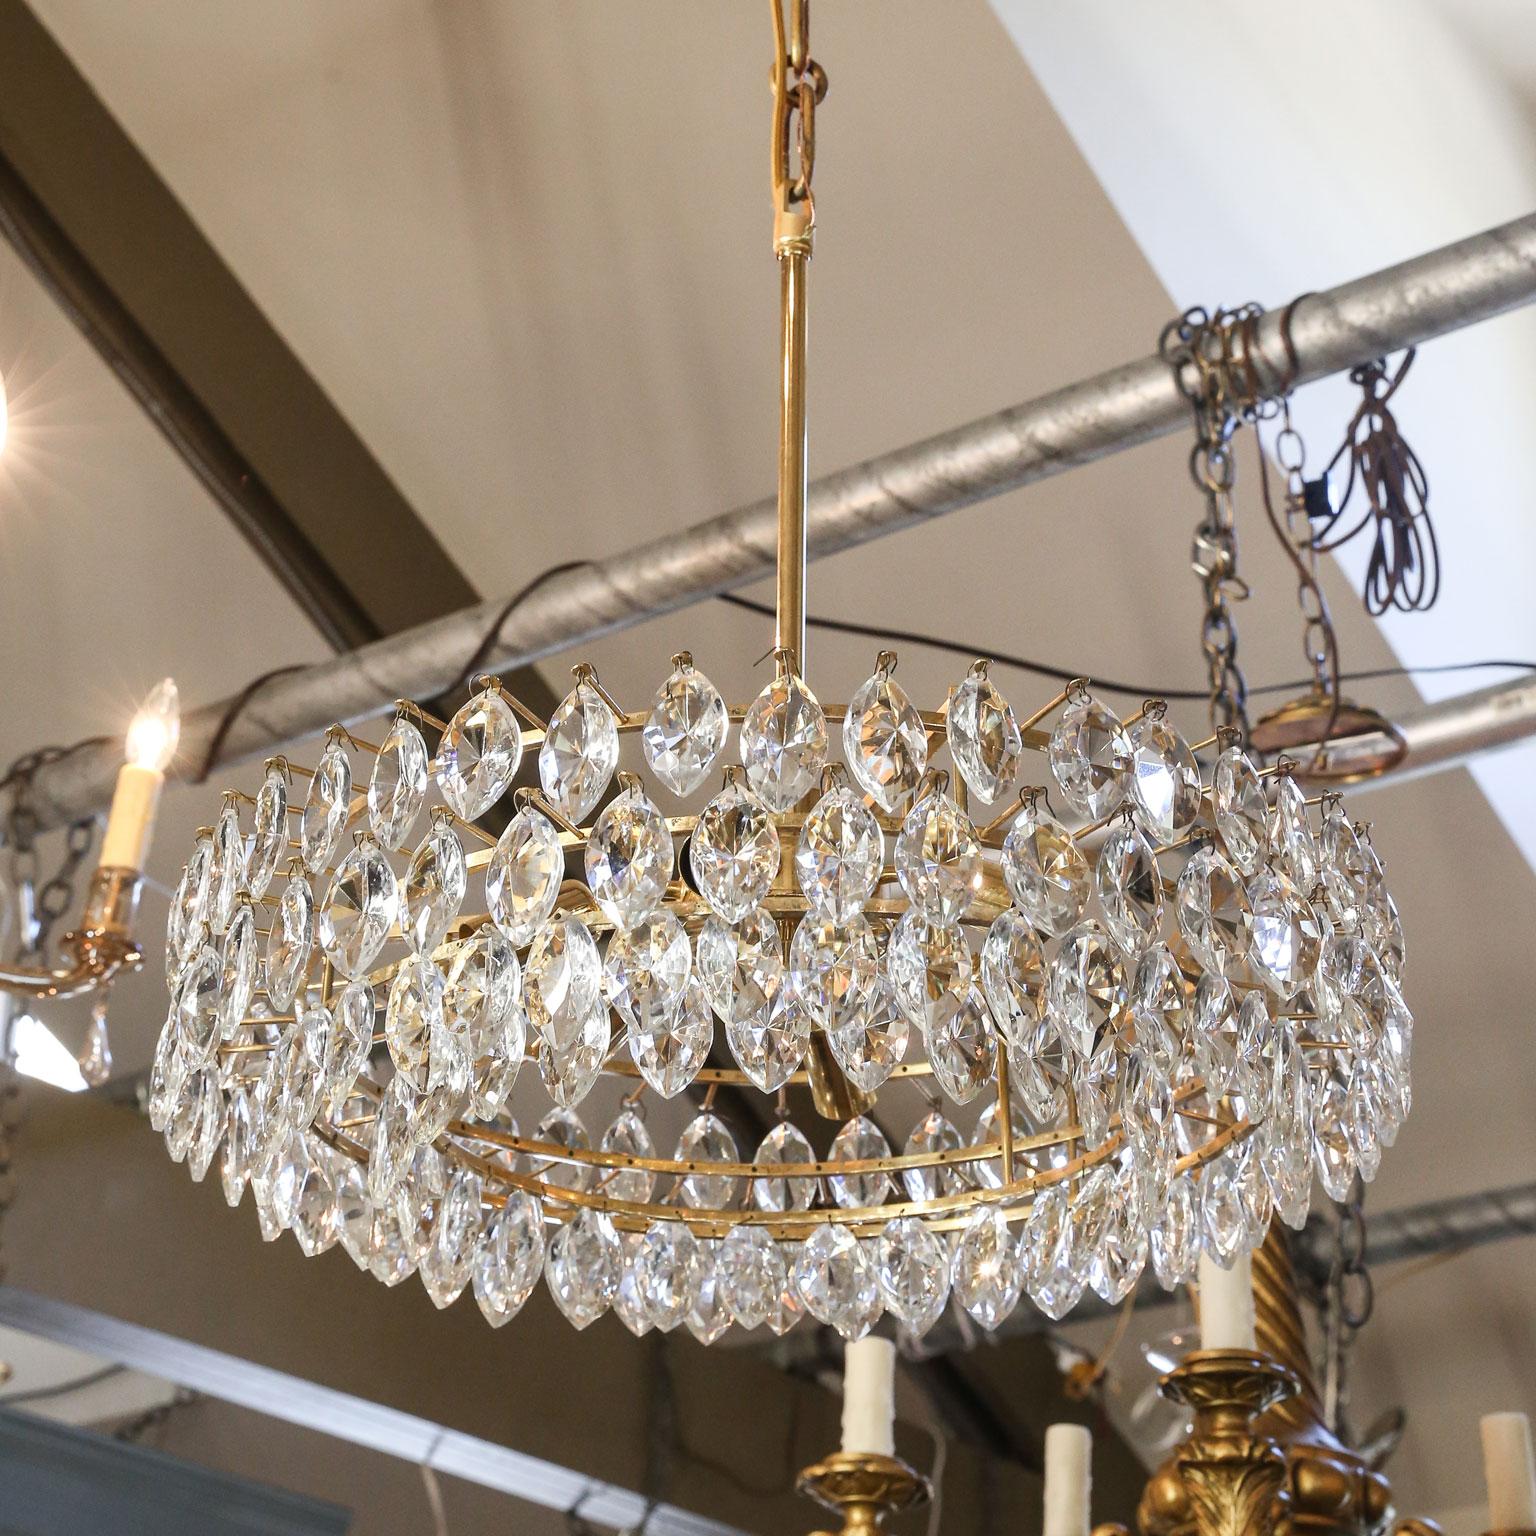 Mid-20th Century Vintage Austrian Palwa Crystal Chandelier With Three Levels